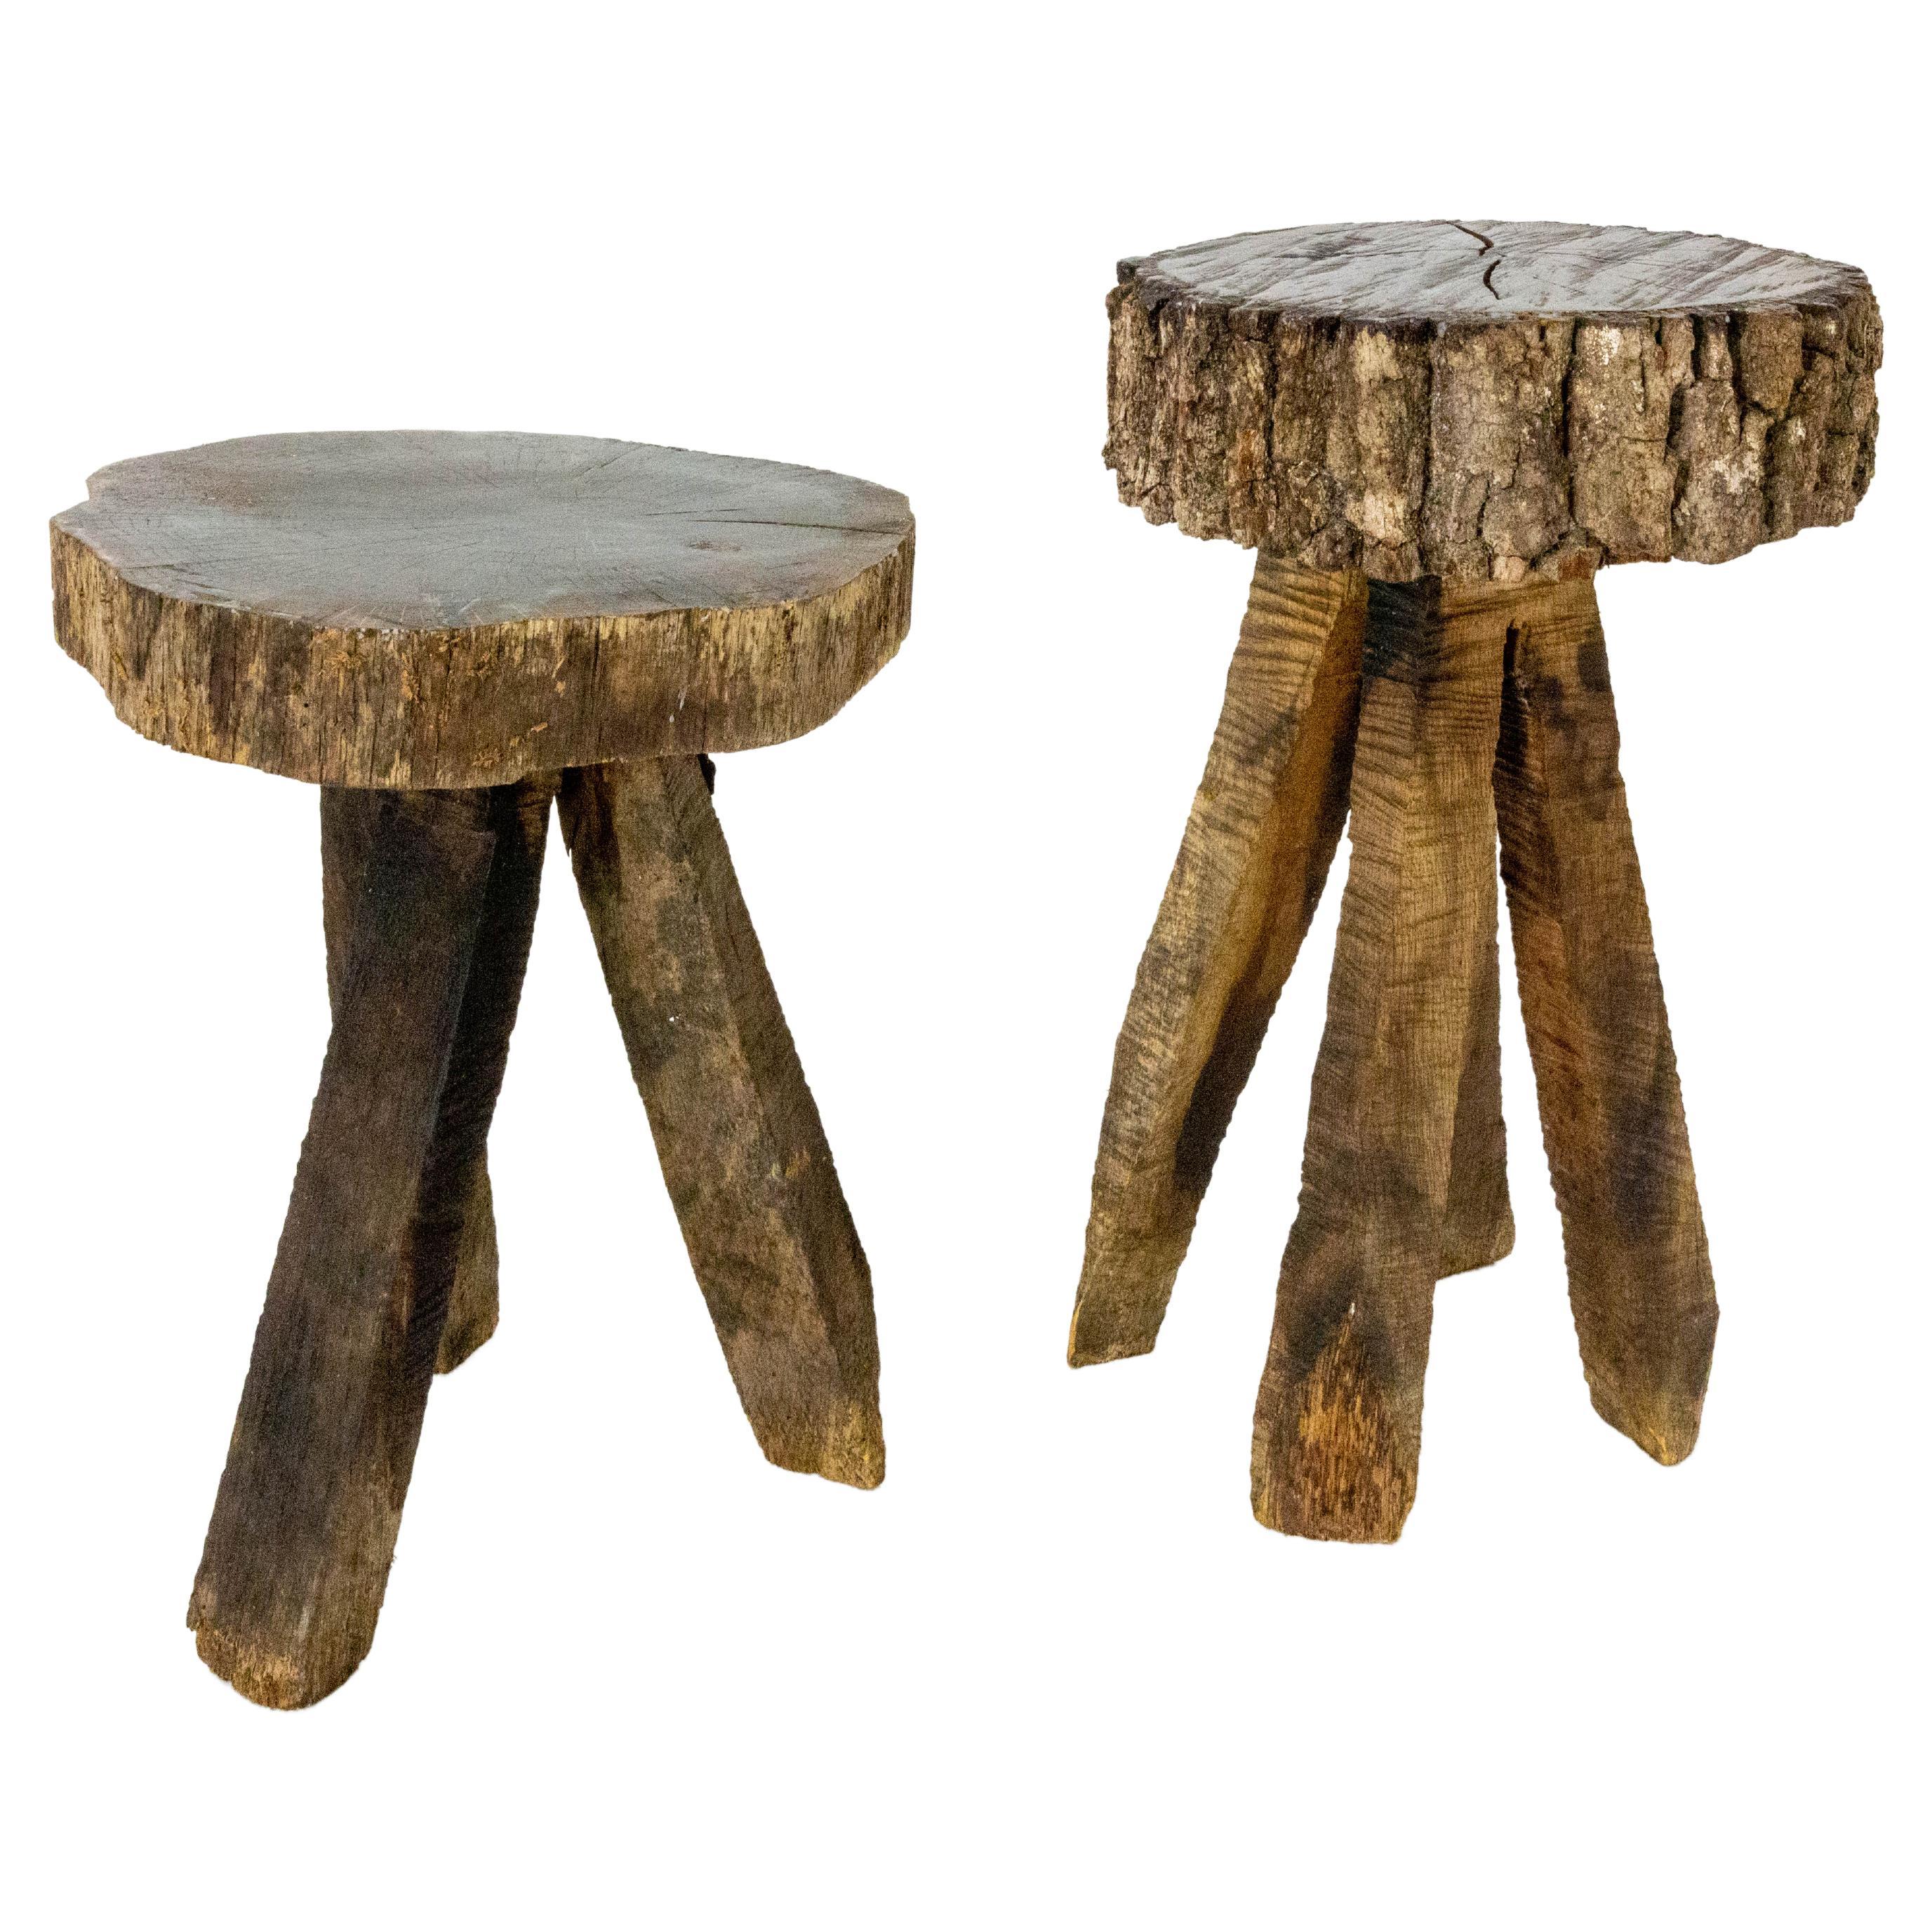 French Pair of Side Tables or Nightstands Bedside Tables, Brutalist circa 1960